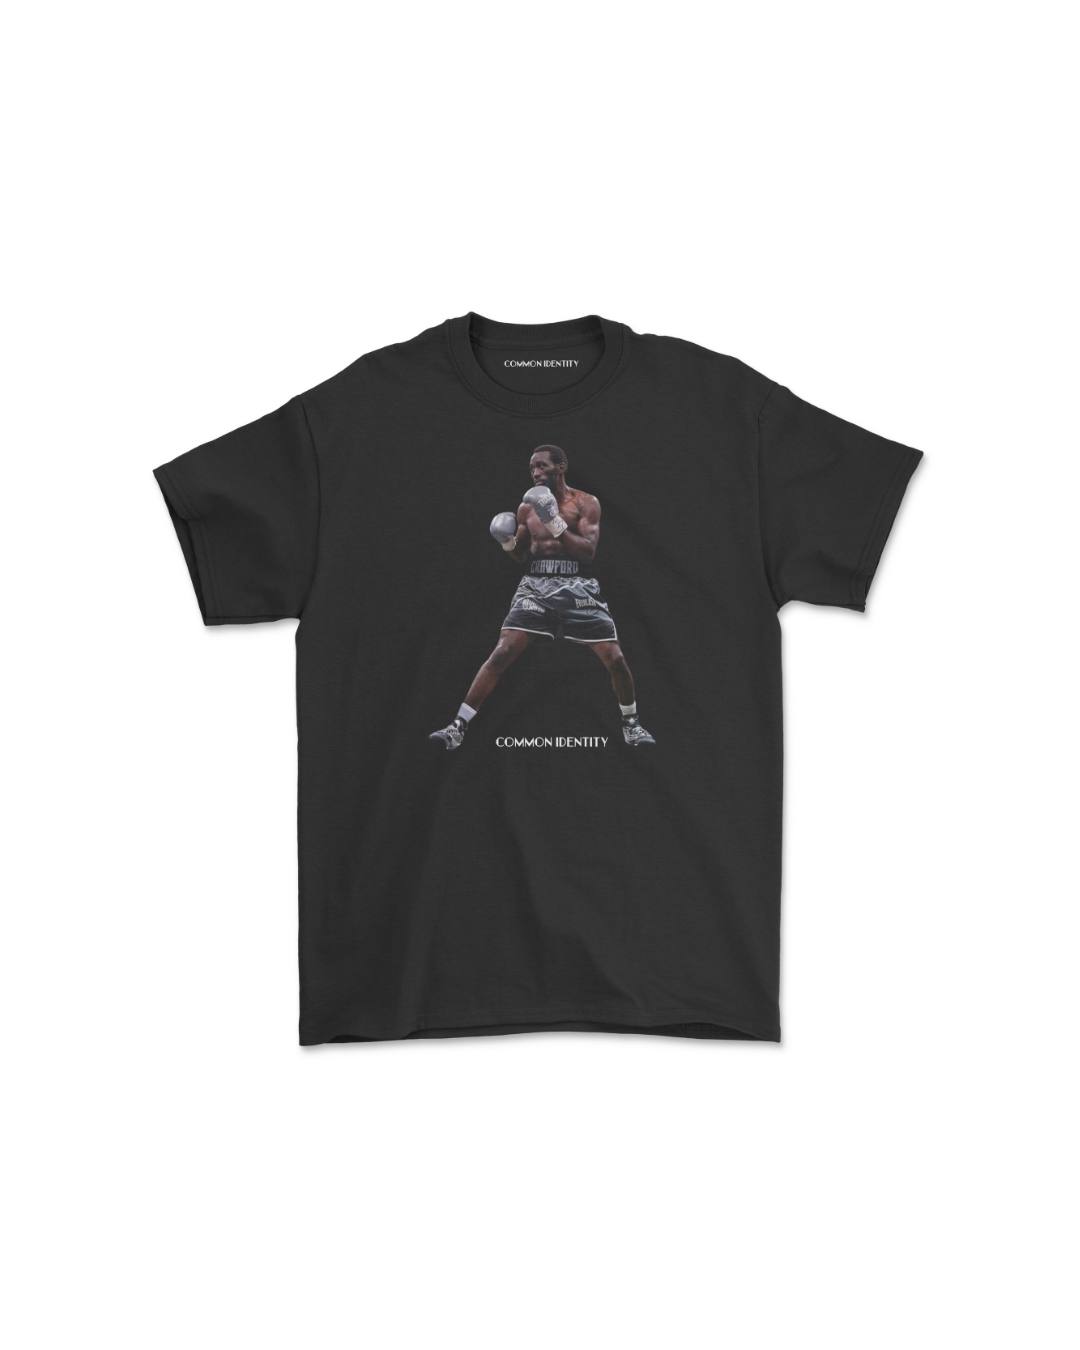 Terence Crawford - T-Shirt - Common Identity